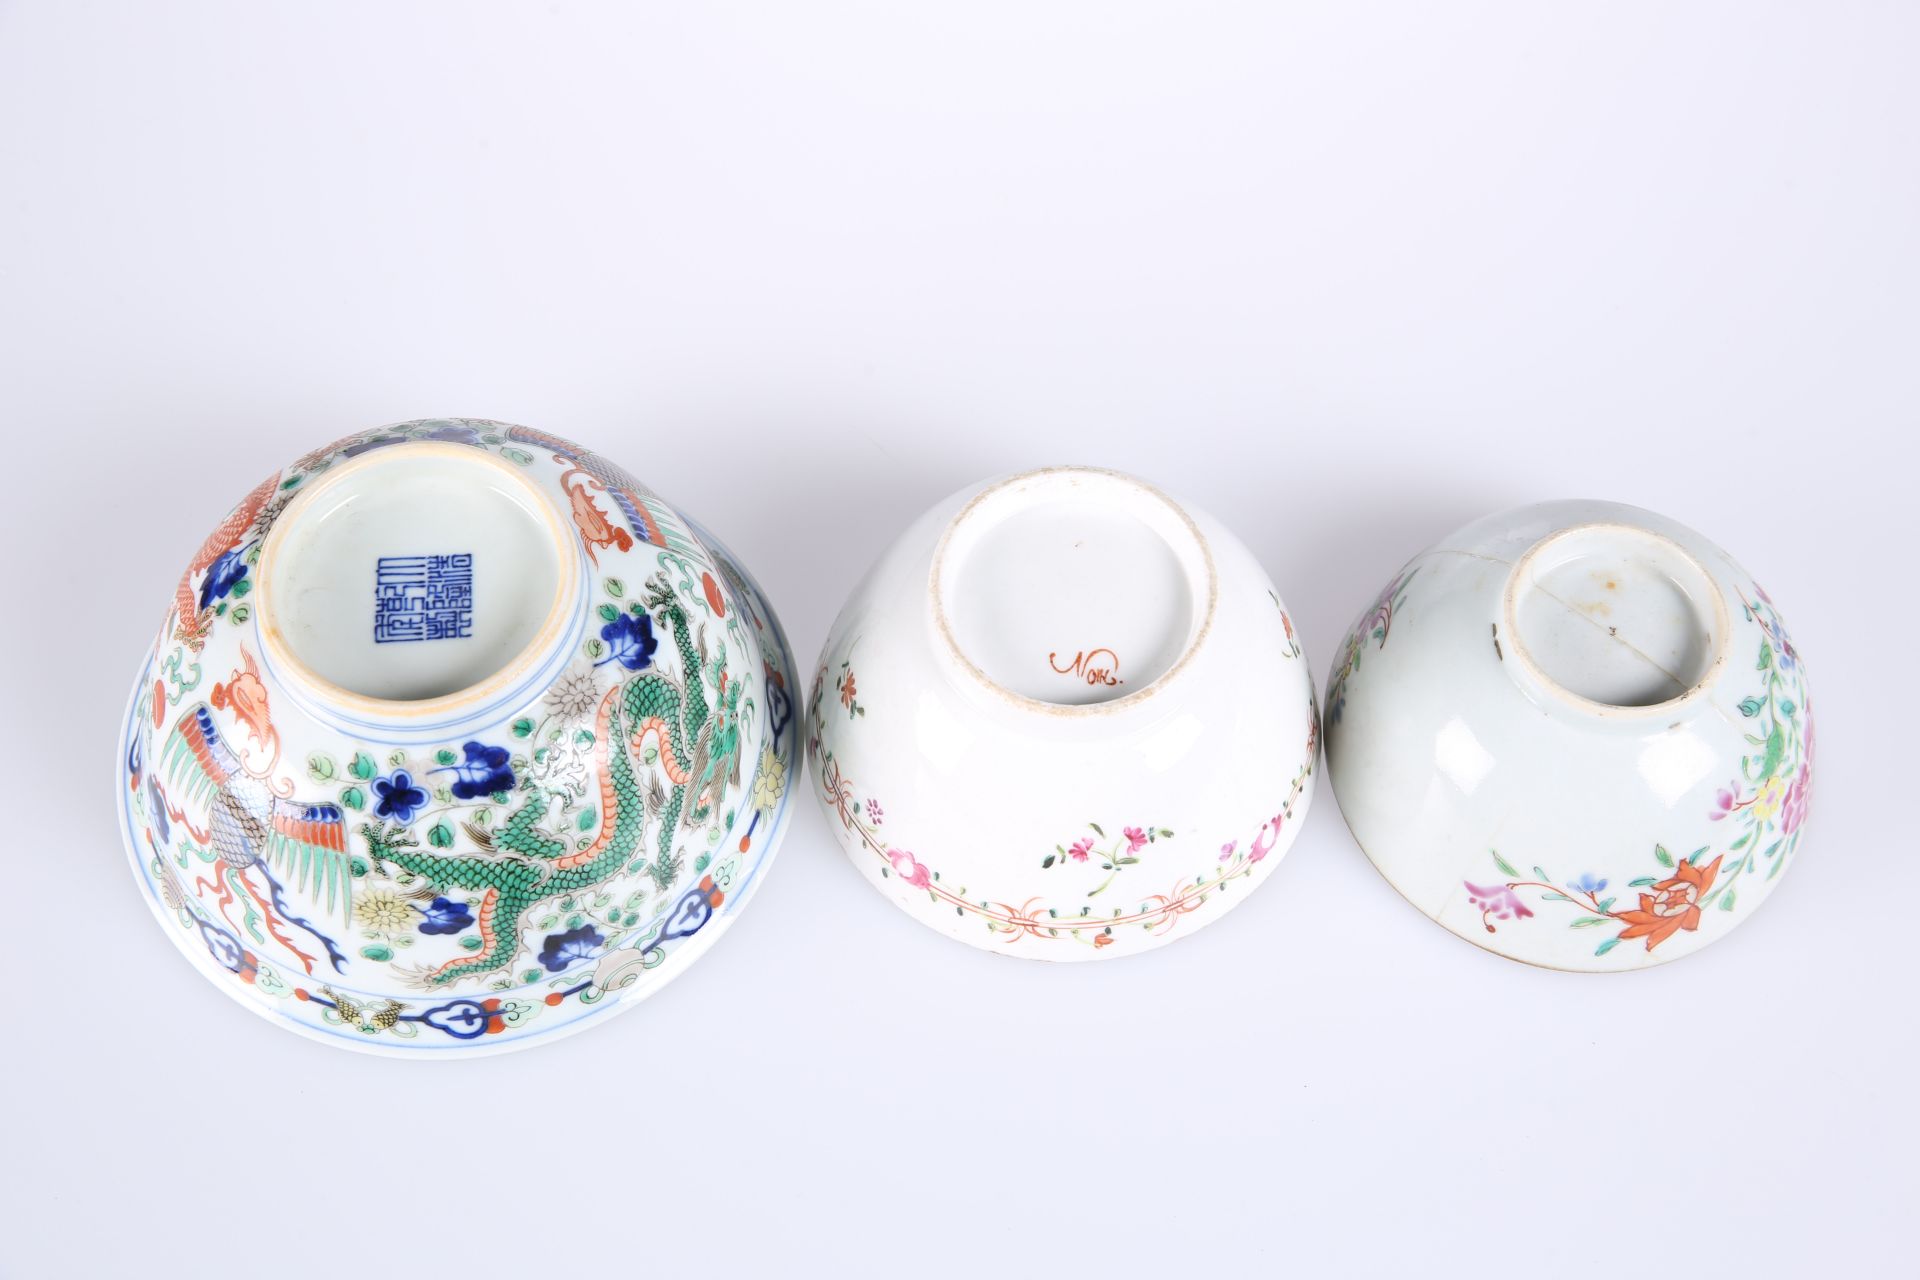 THREE CHINESE PORCELAIN BOWLS, the first painted in a Famille Verte palette - Image 2 of 2